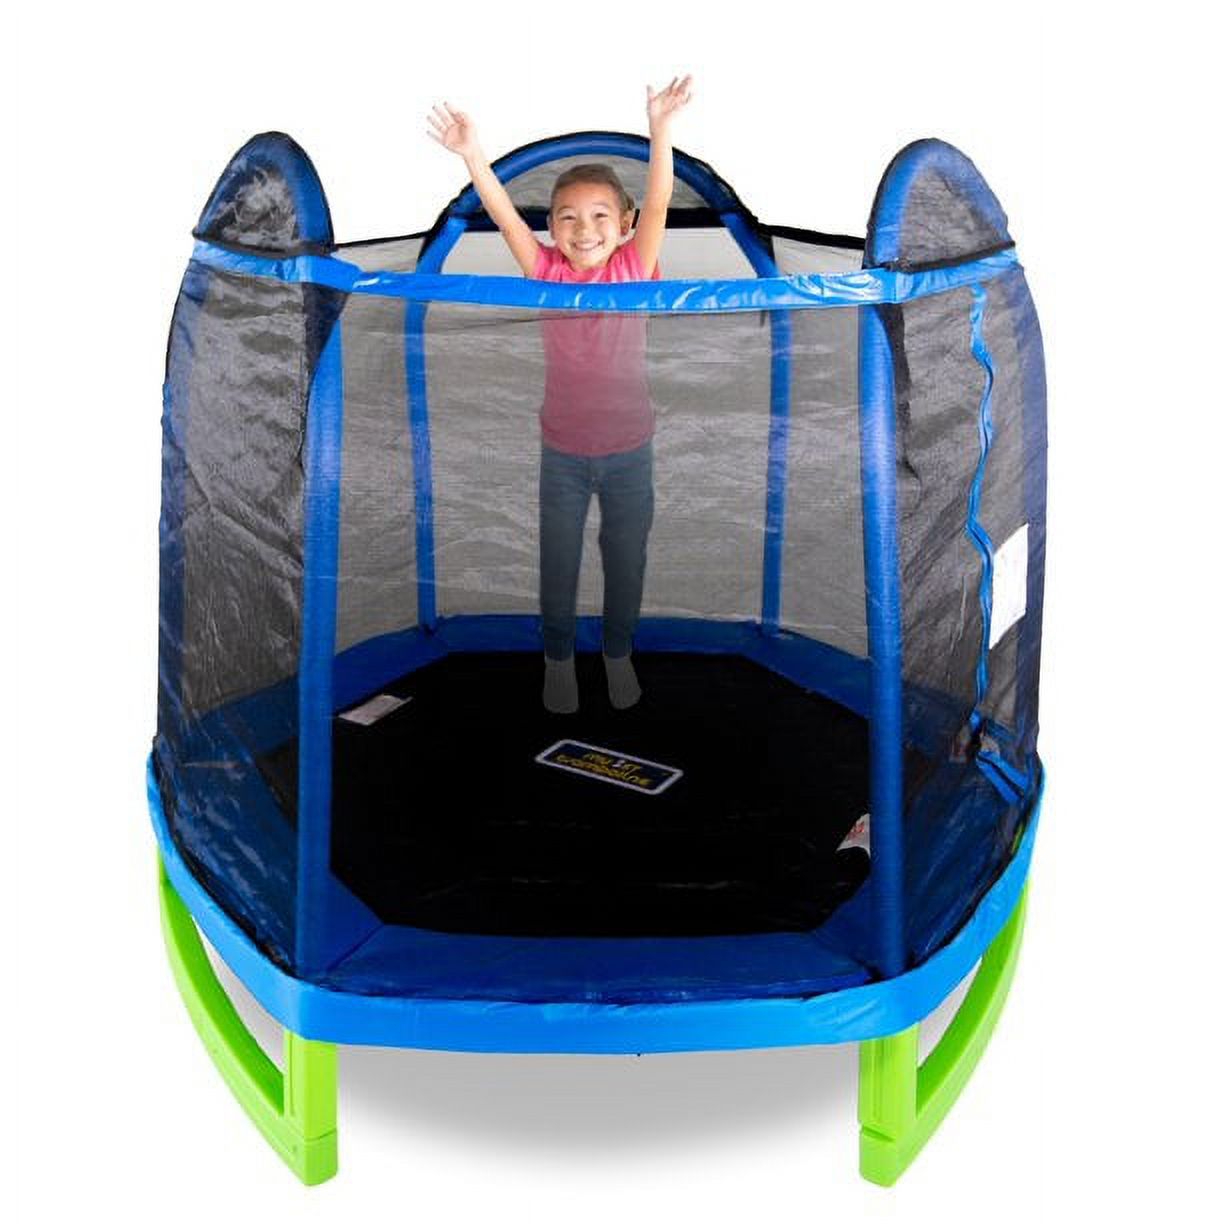 Bounce Pro 7-Foot My First Trampoline With Flash Light Zone (Ages 3-10) - image 1 of 9